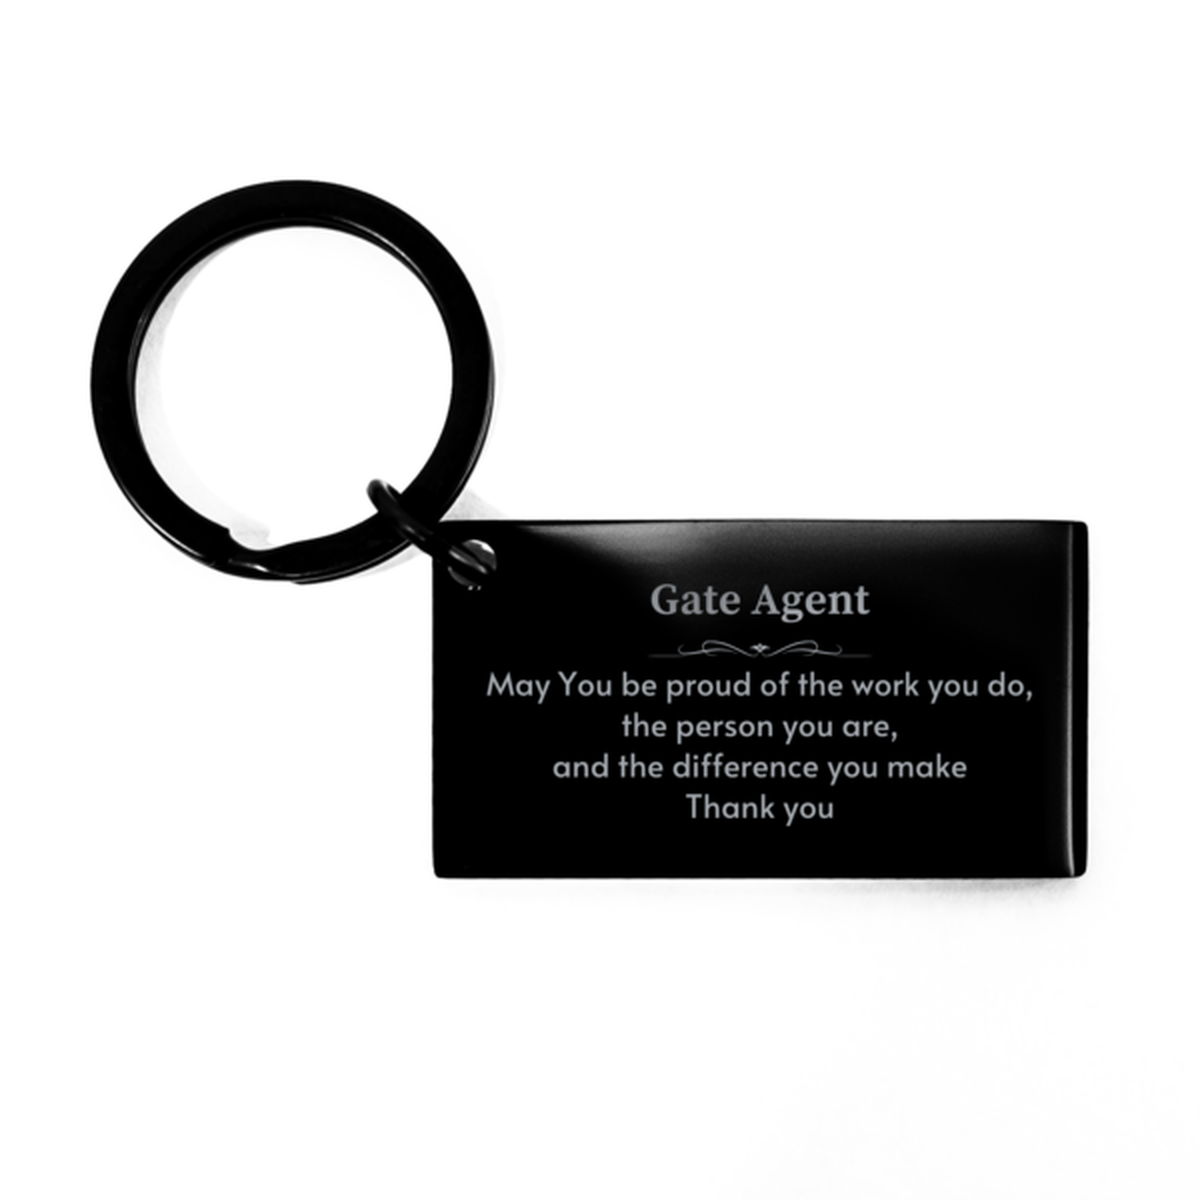 Heartwarming Keychain Retirement Coworkers Gifts for Gate Agent, Mail Carrier May You be proud of the work you do, the person you are Gifts for Boss Men Women Friends